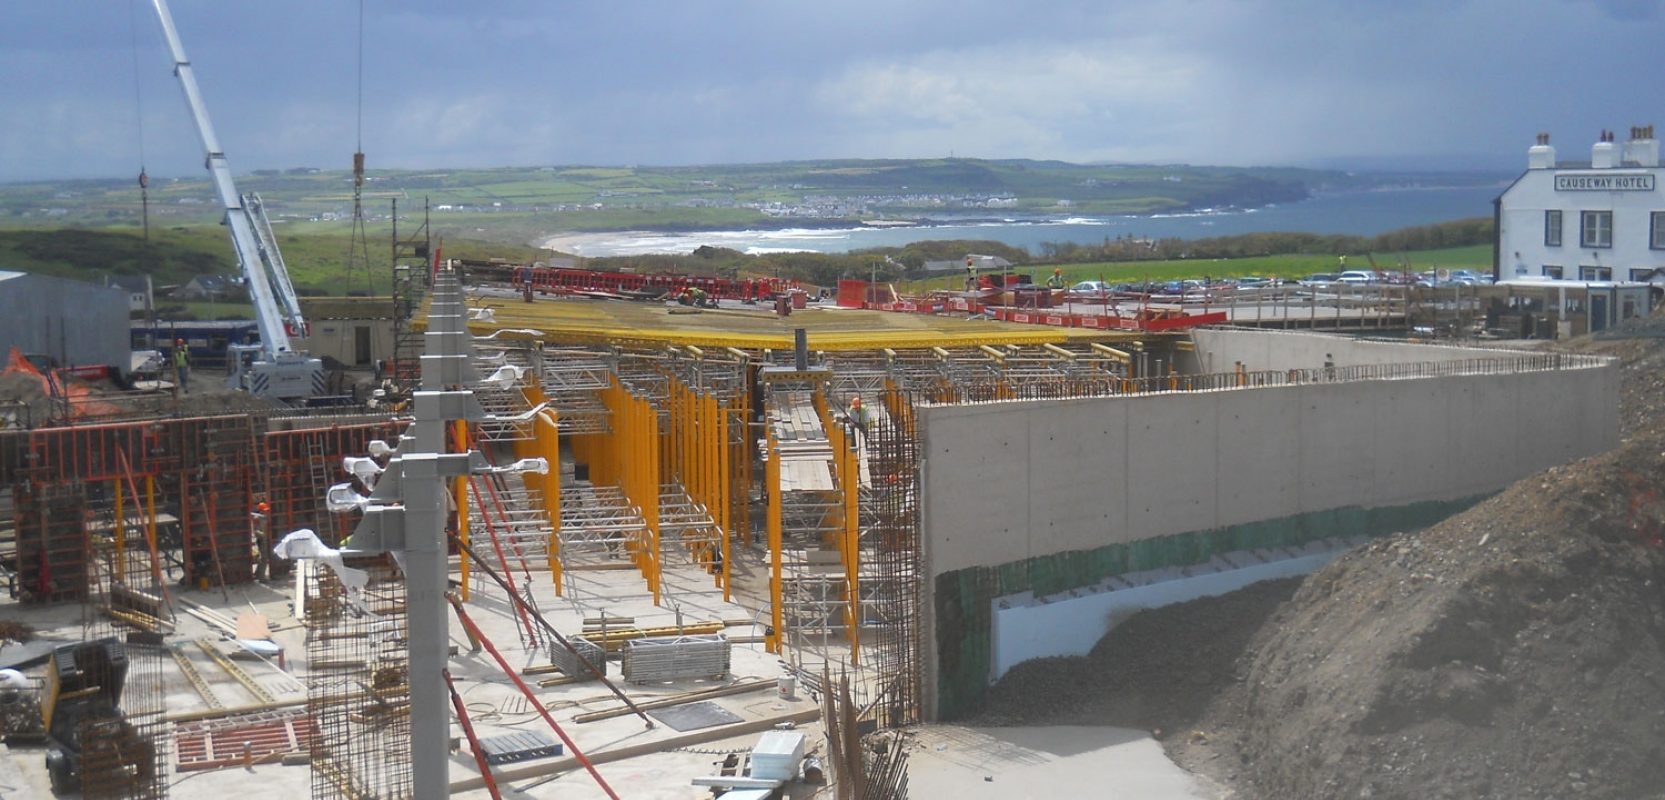 Images of Giant's Causeway Visitor Centre project